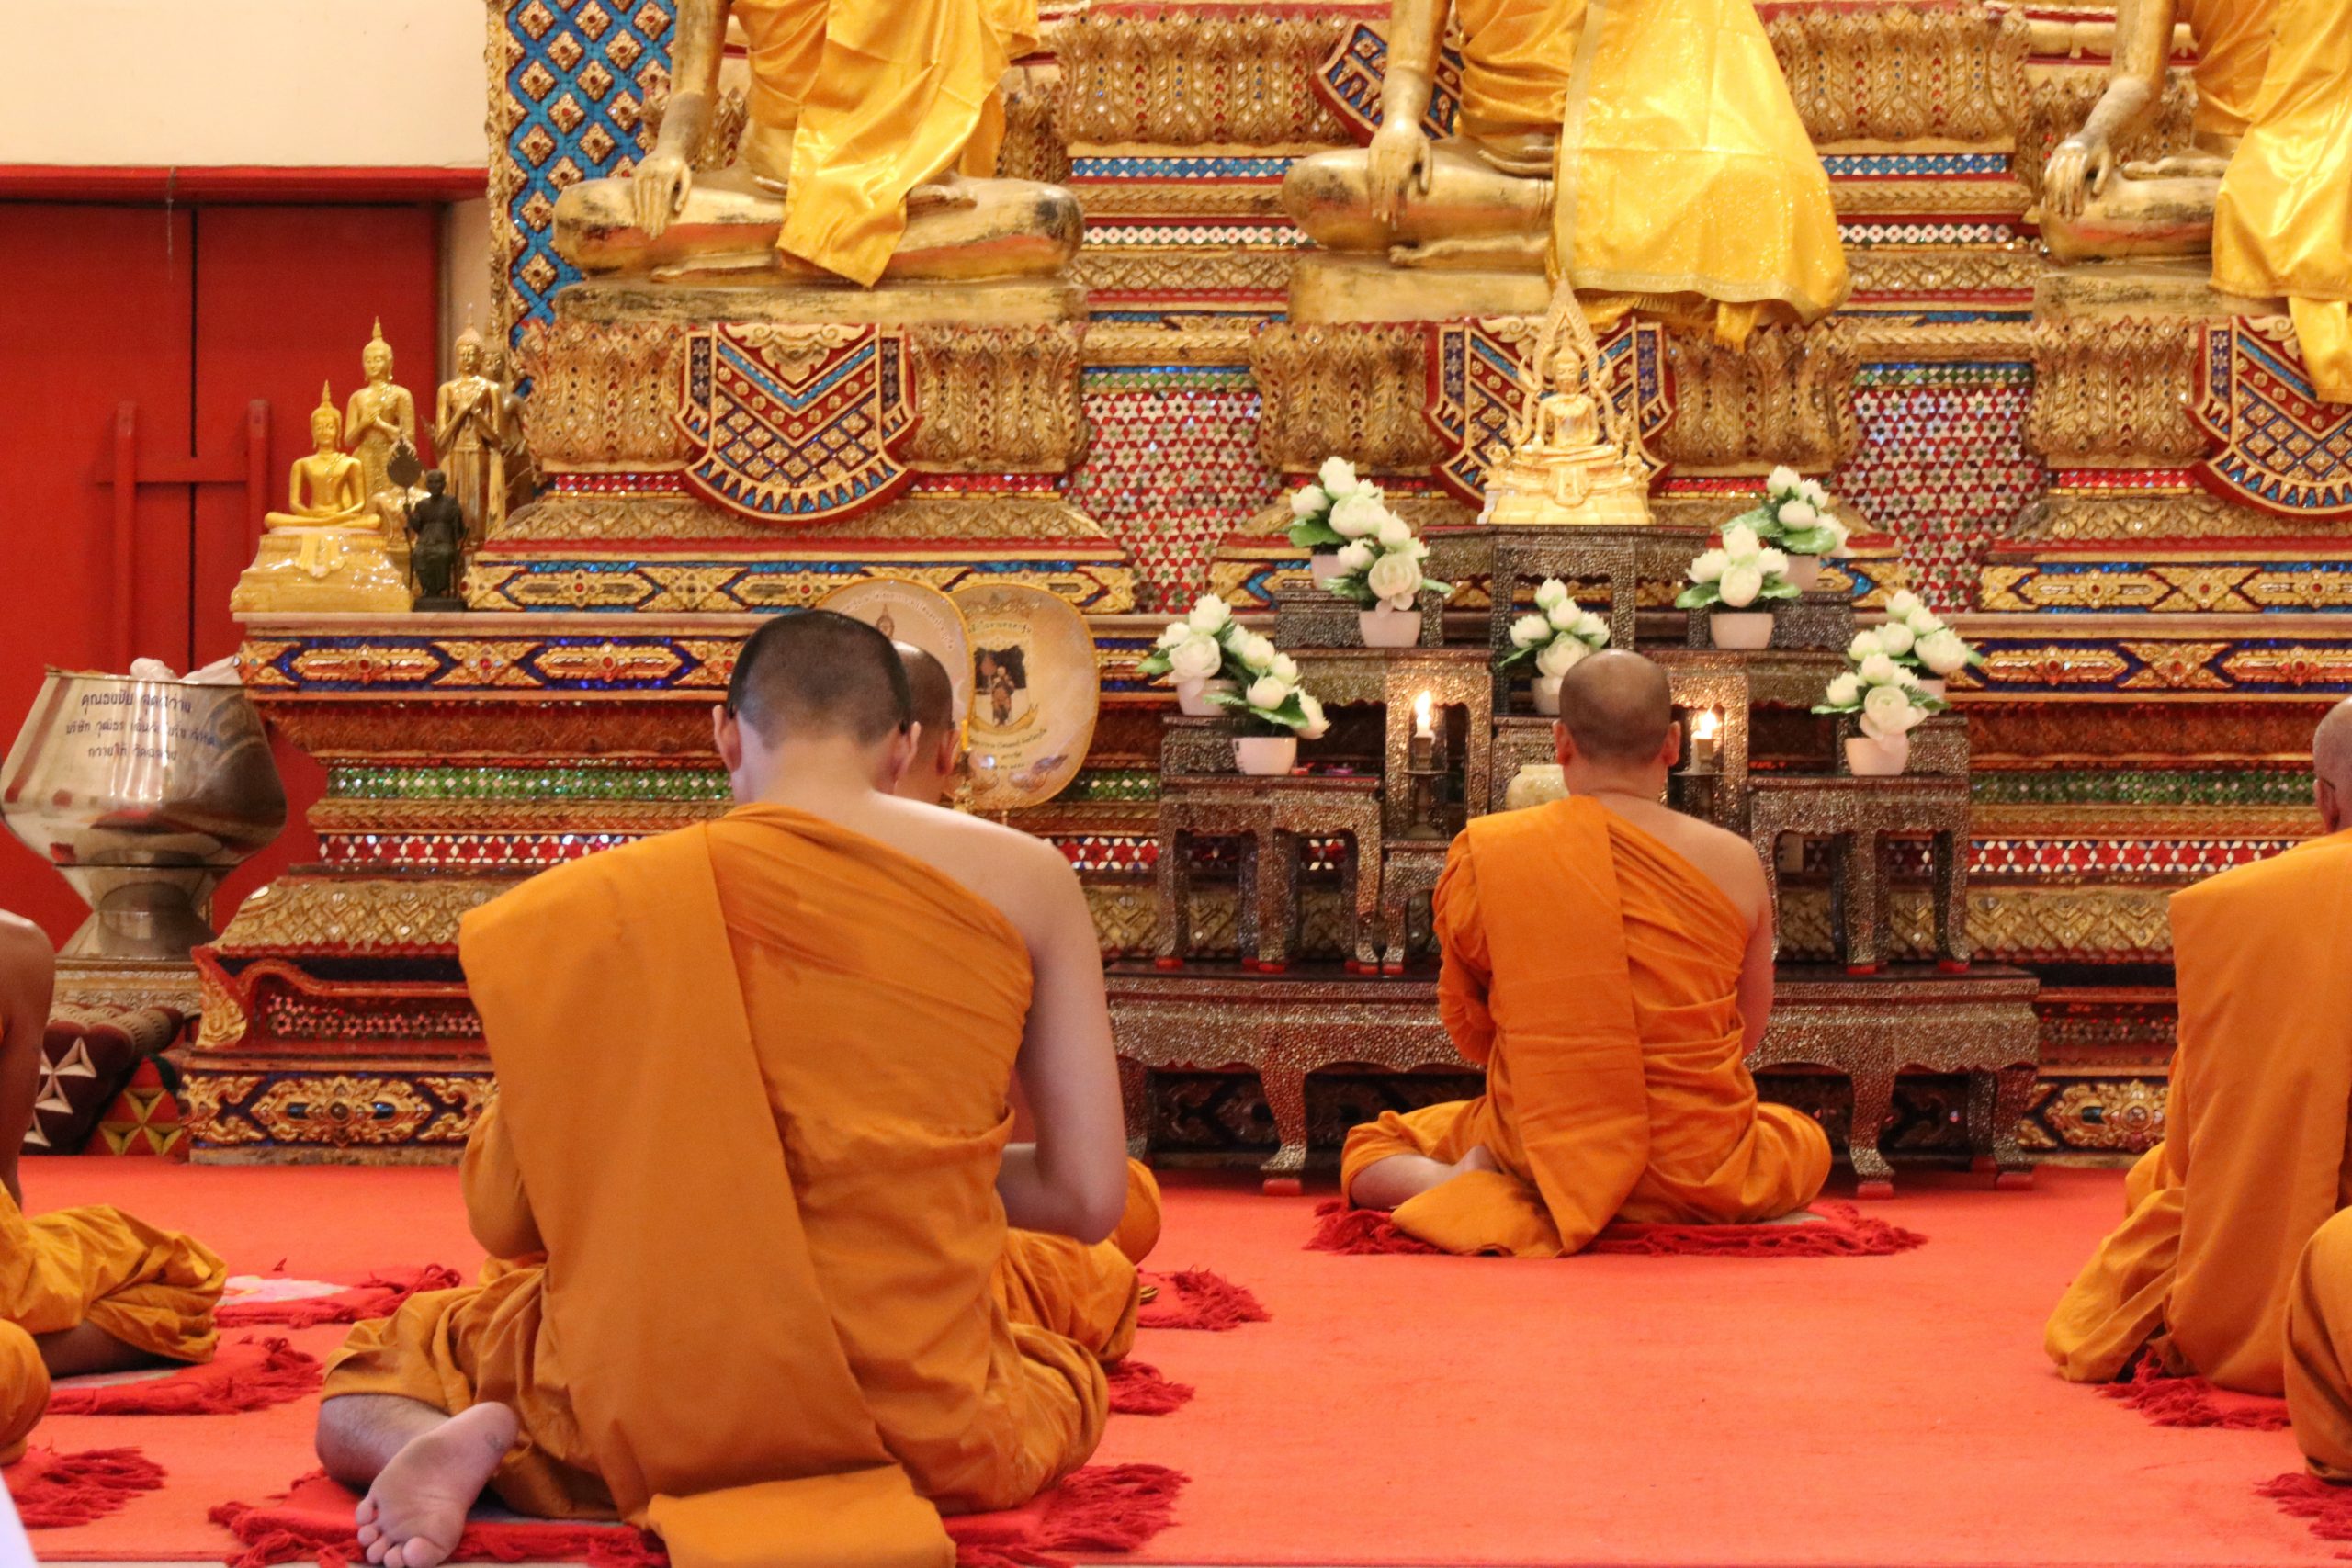 A group of Thai monks tested positive for meth. Image for illustration purposes only. Image credit: Niels Steeman via Unsplash